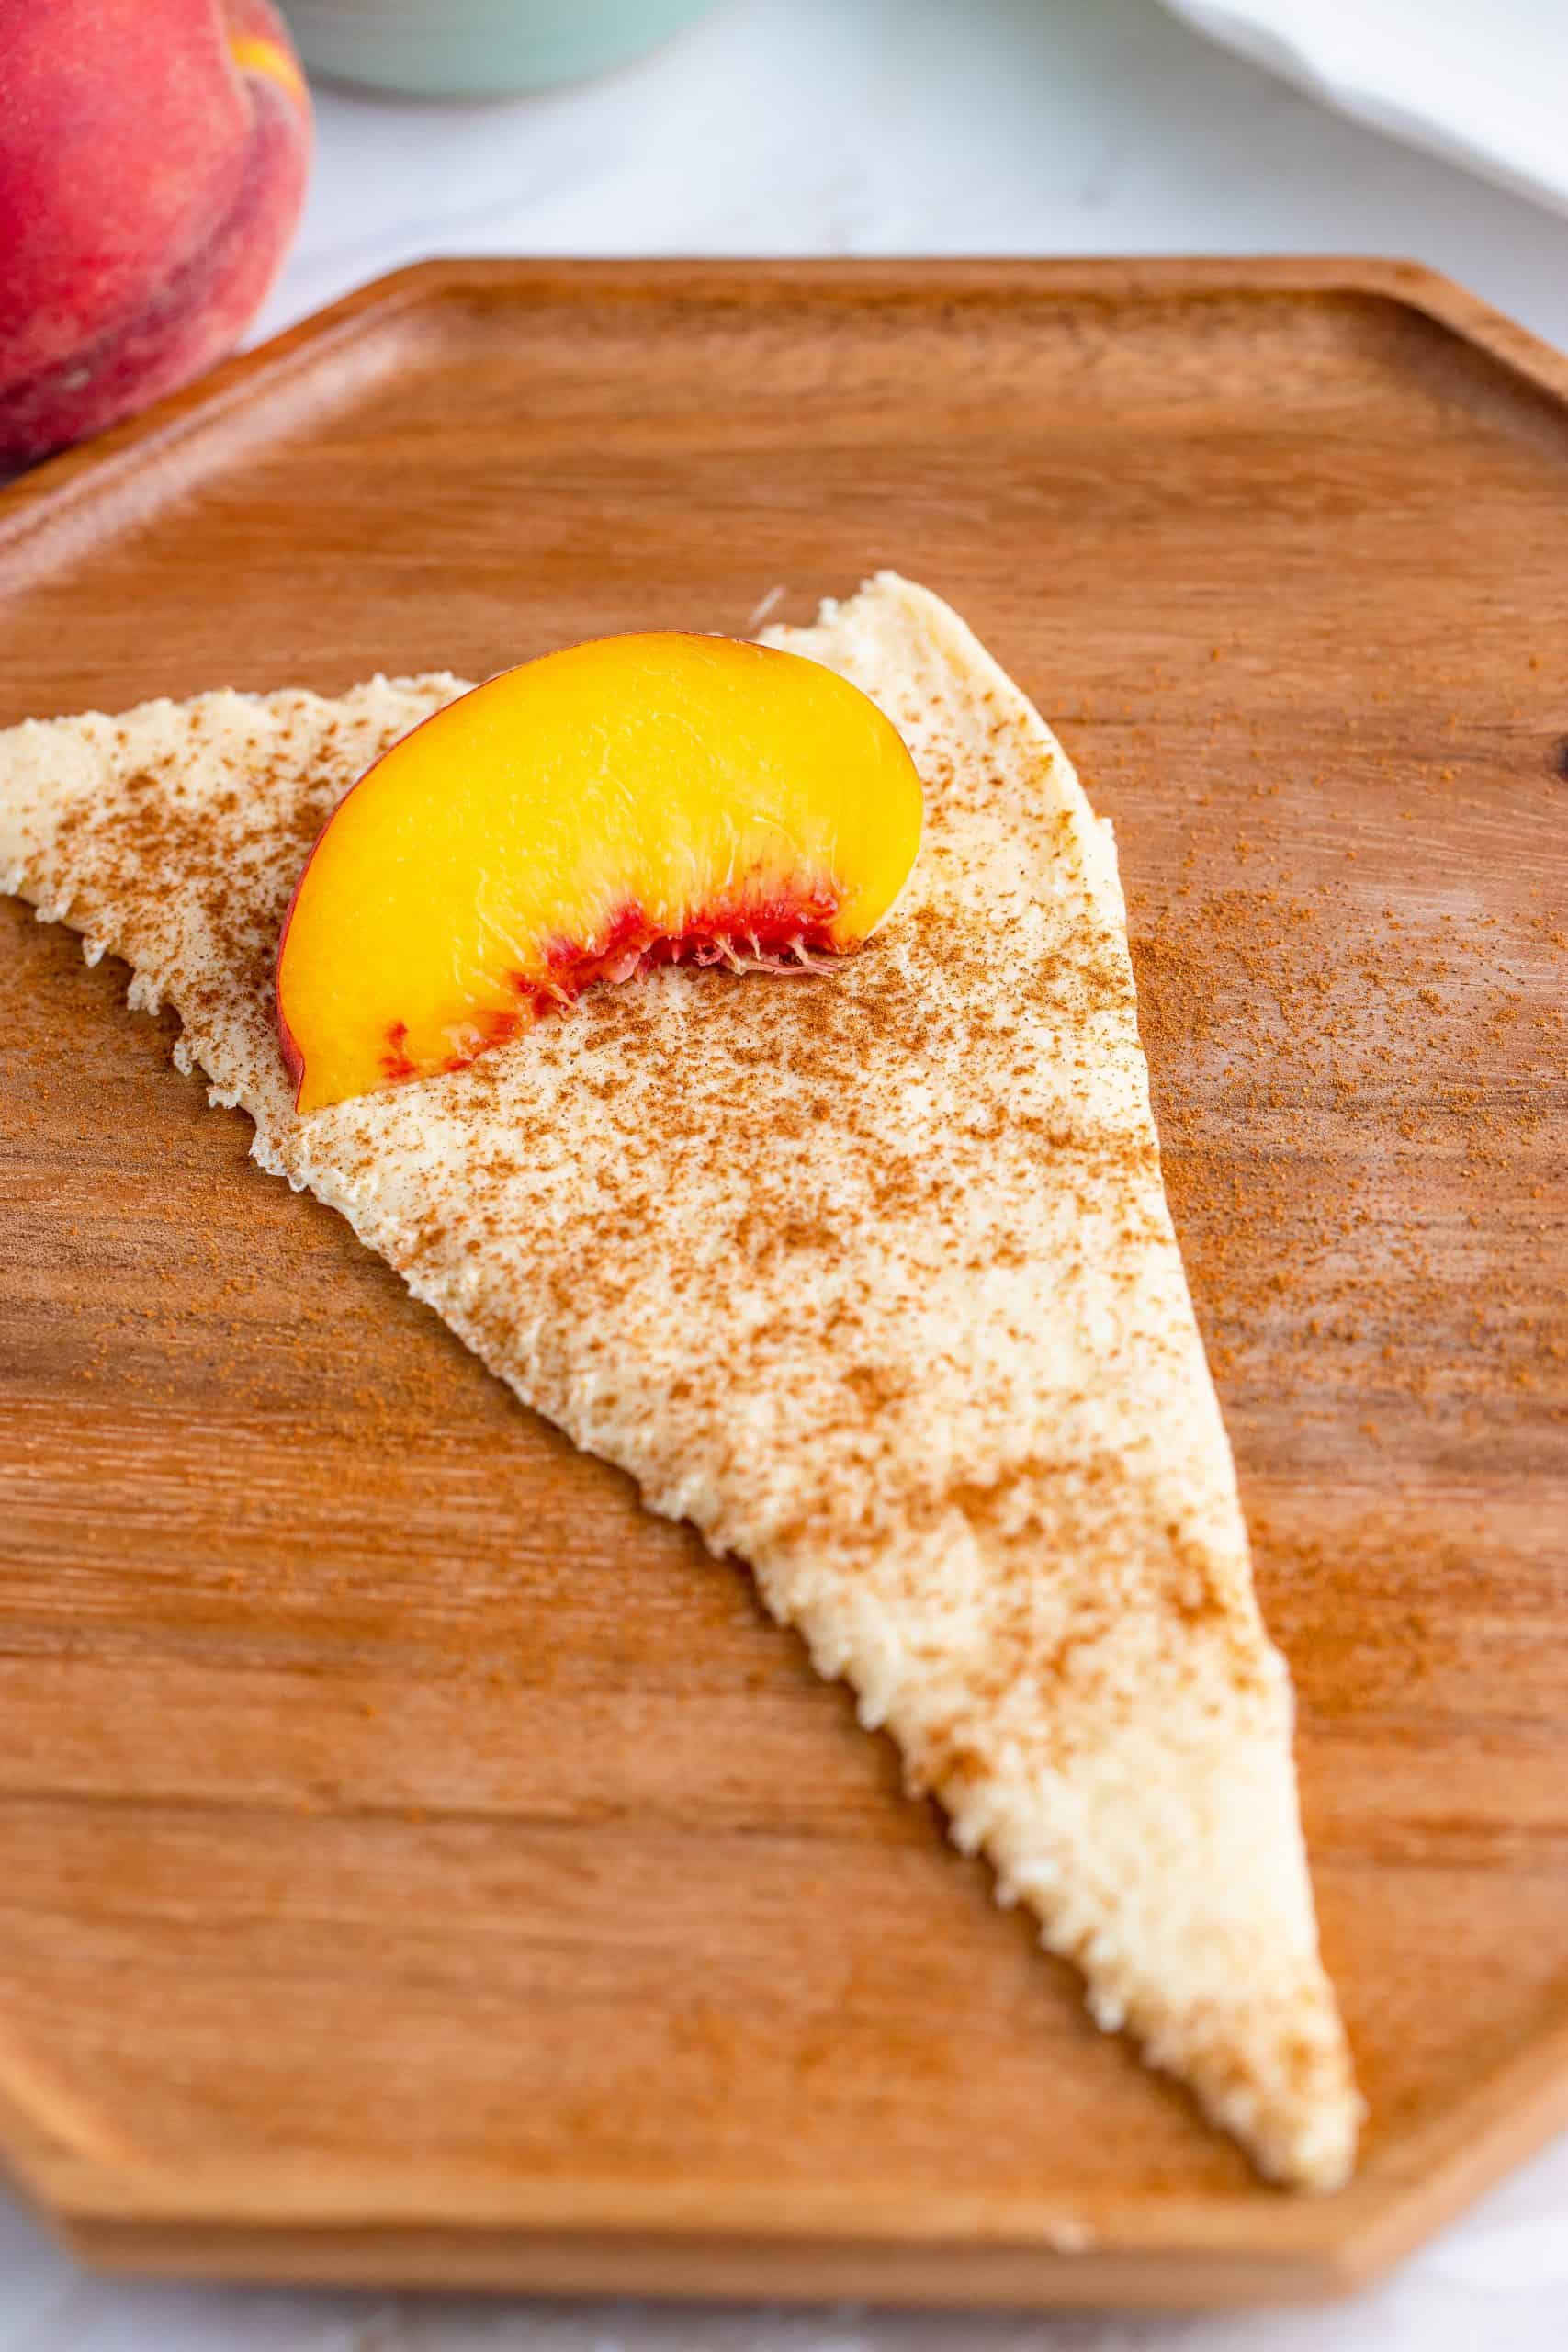 Peach slice at end of crescent roll.